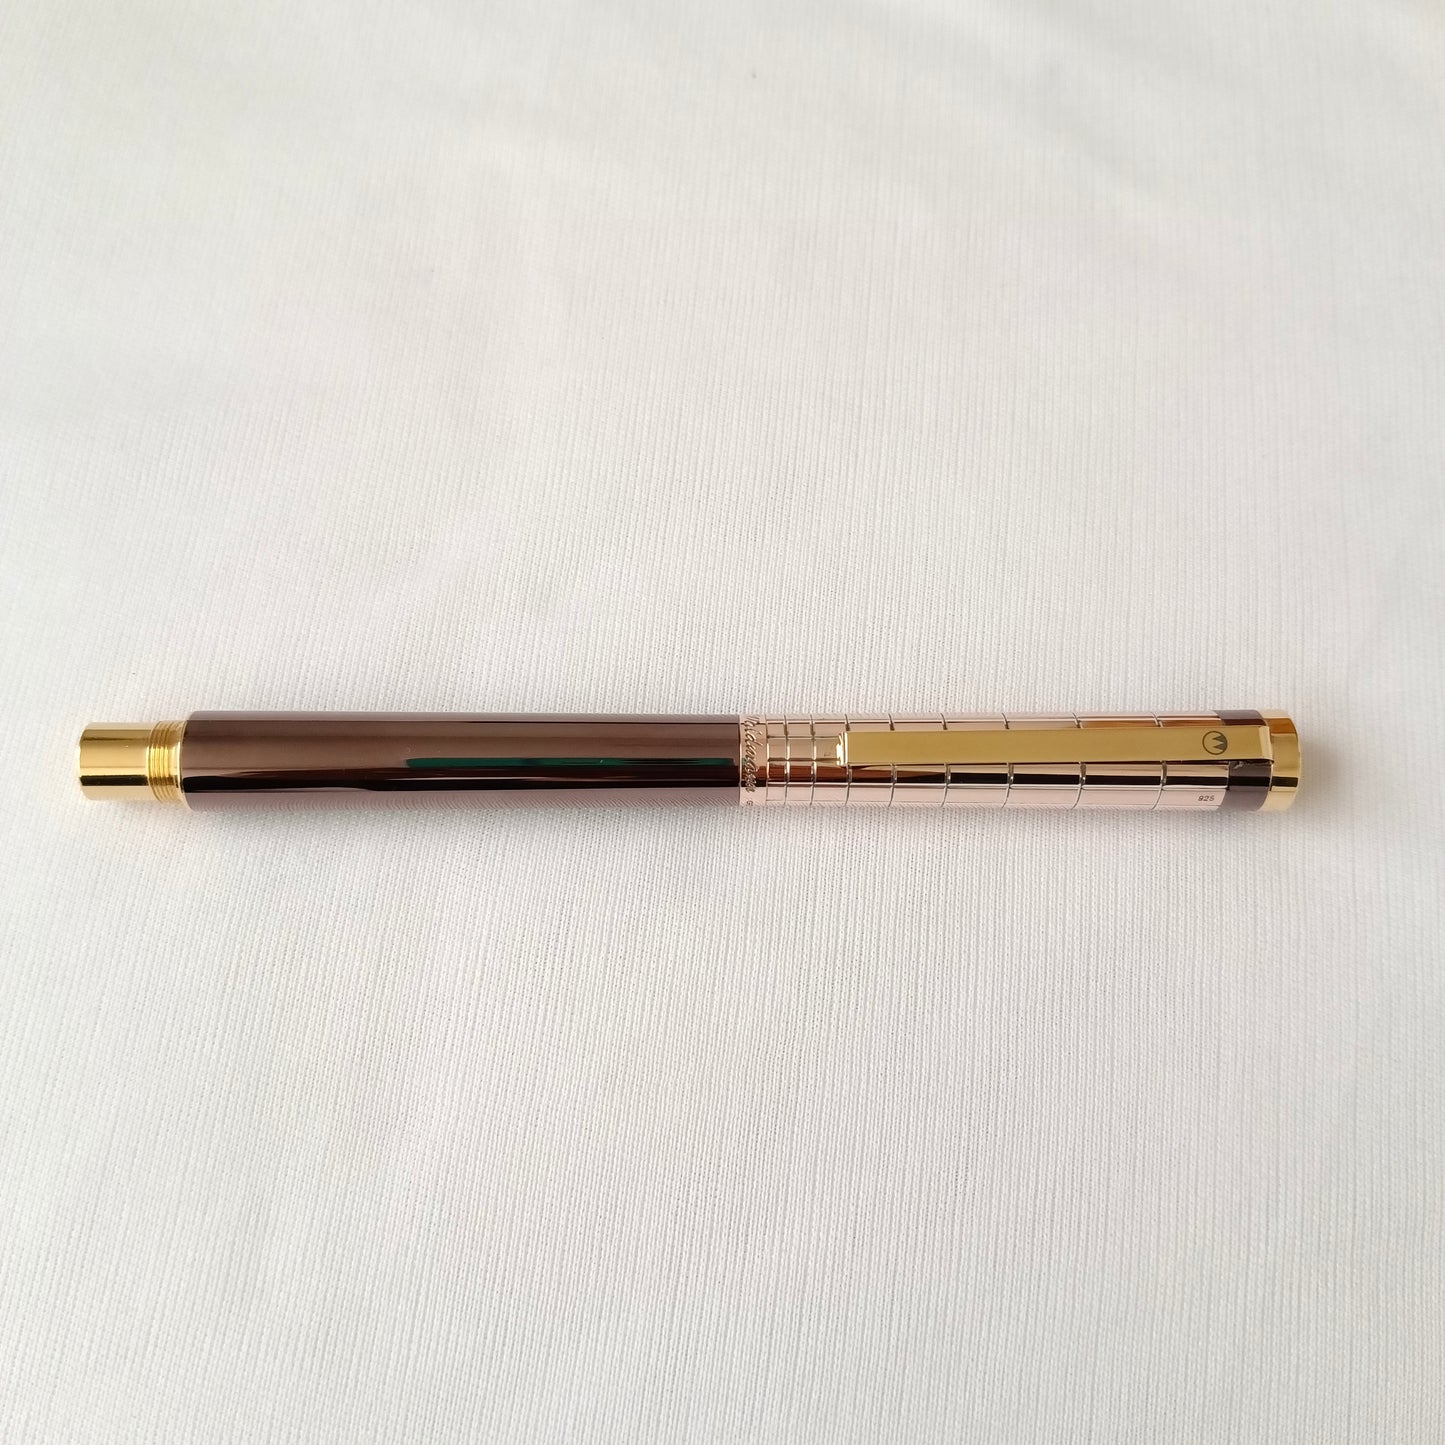 Waldmann Xetra Fountain Pen PVD Chocolate Rose Gold Plated 18kt Medium Nib Made In Germany